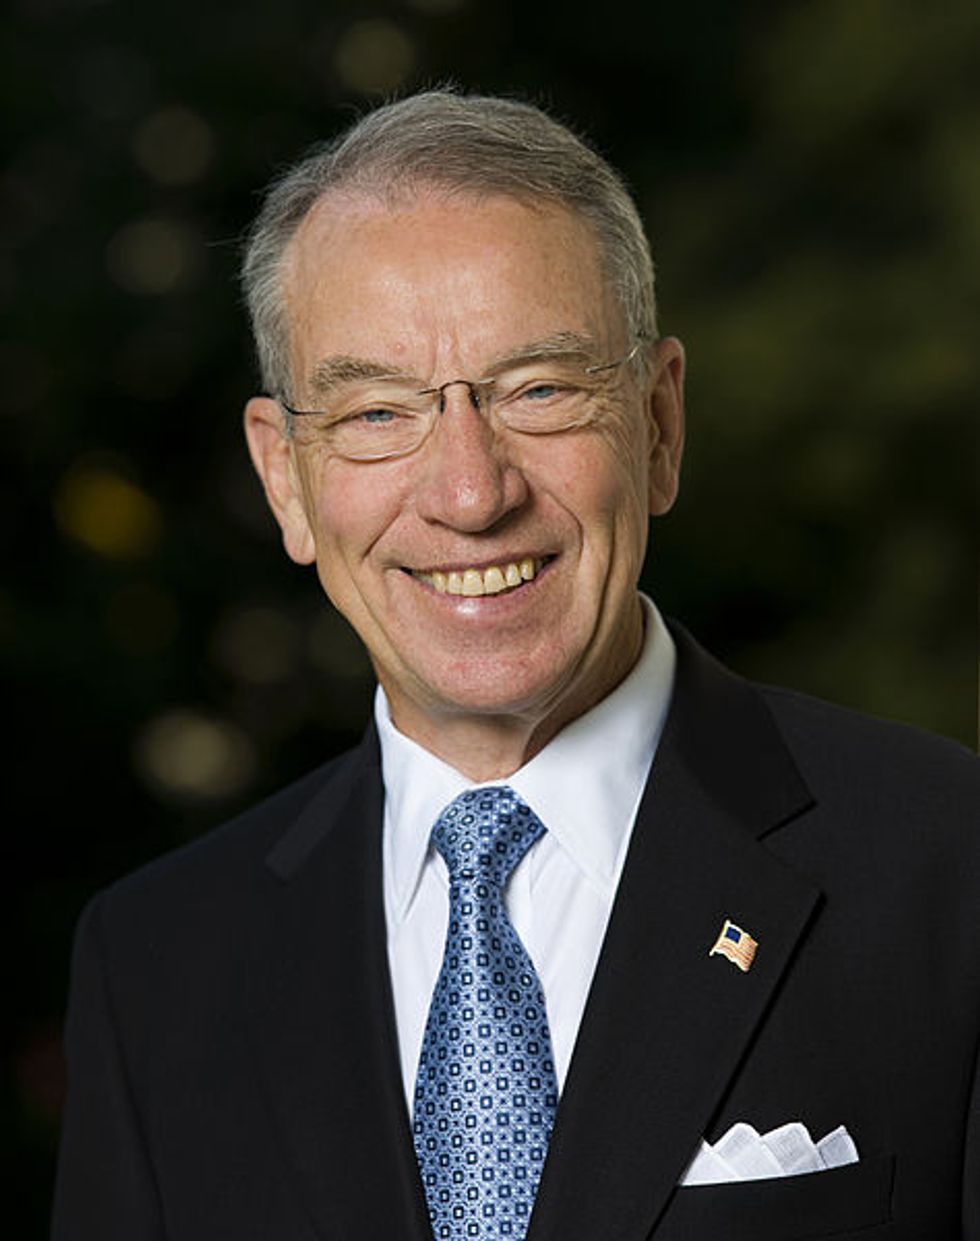 RINO Chuck Grassley Picks SCOTUS Fight With Rightwing Chuck Grassley, Both Lose